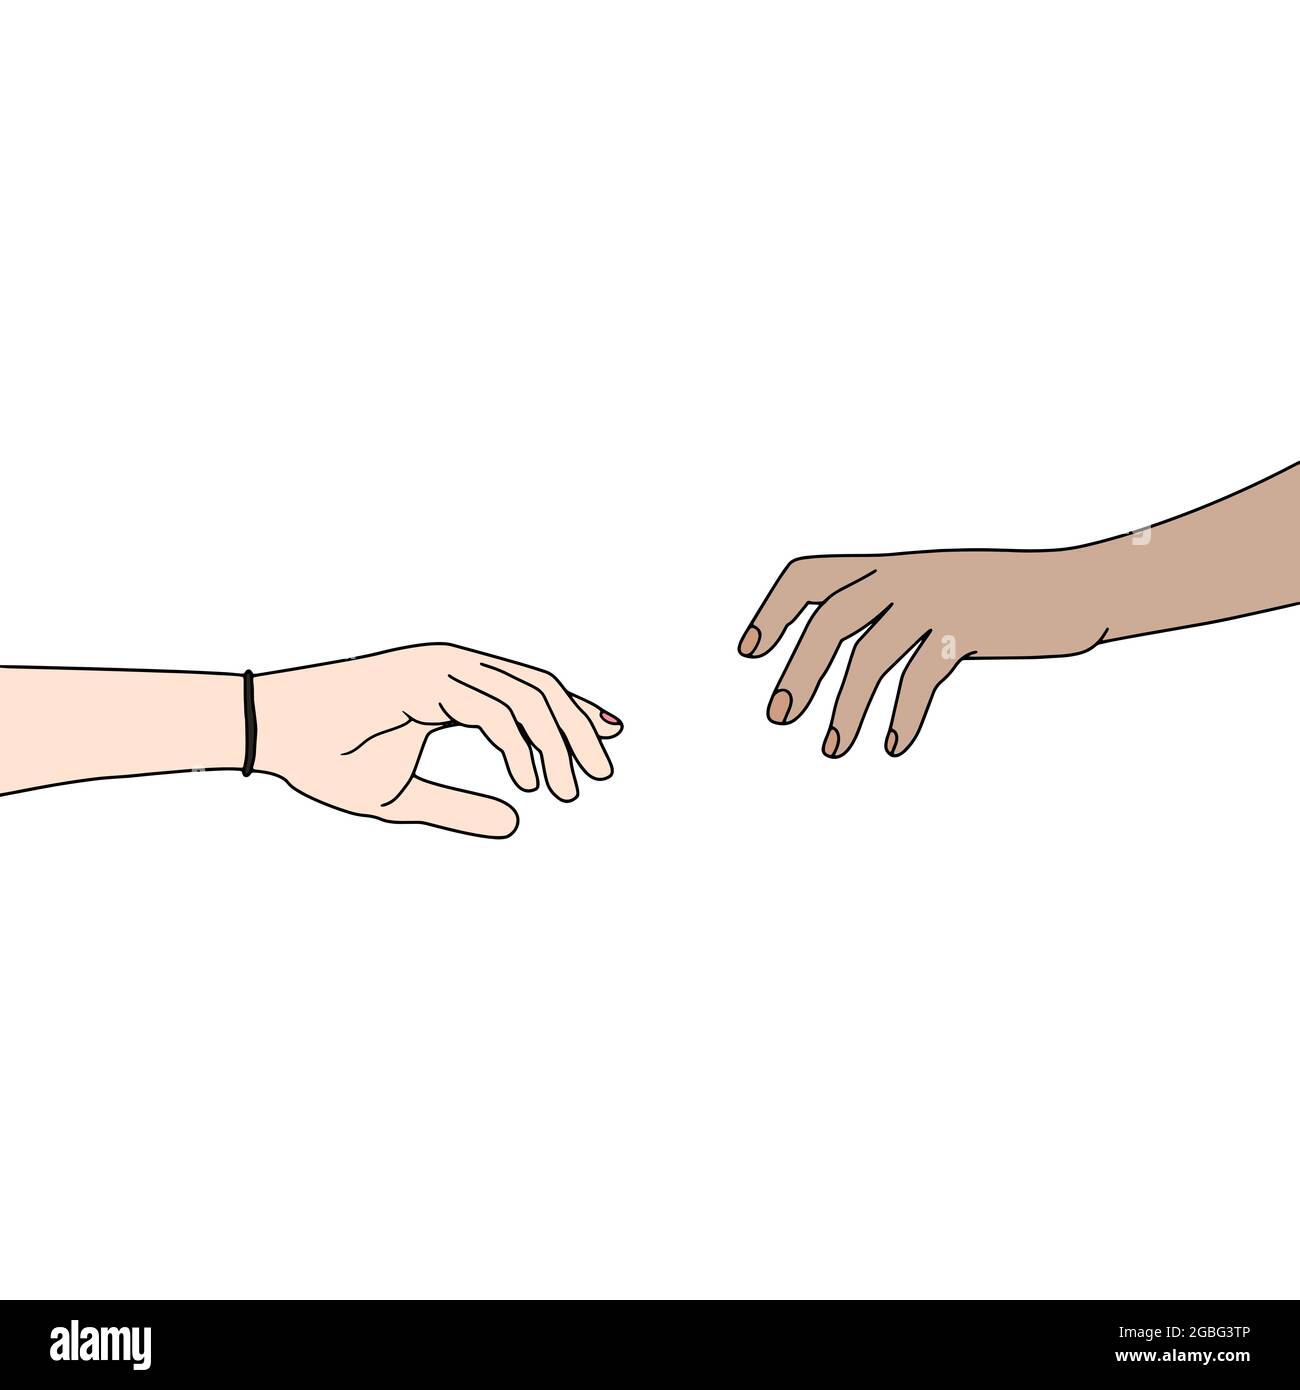 Illustration Of The Hands Of Mixed Race People Reaching Out To Each Other Stock Photo Alamy